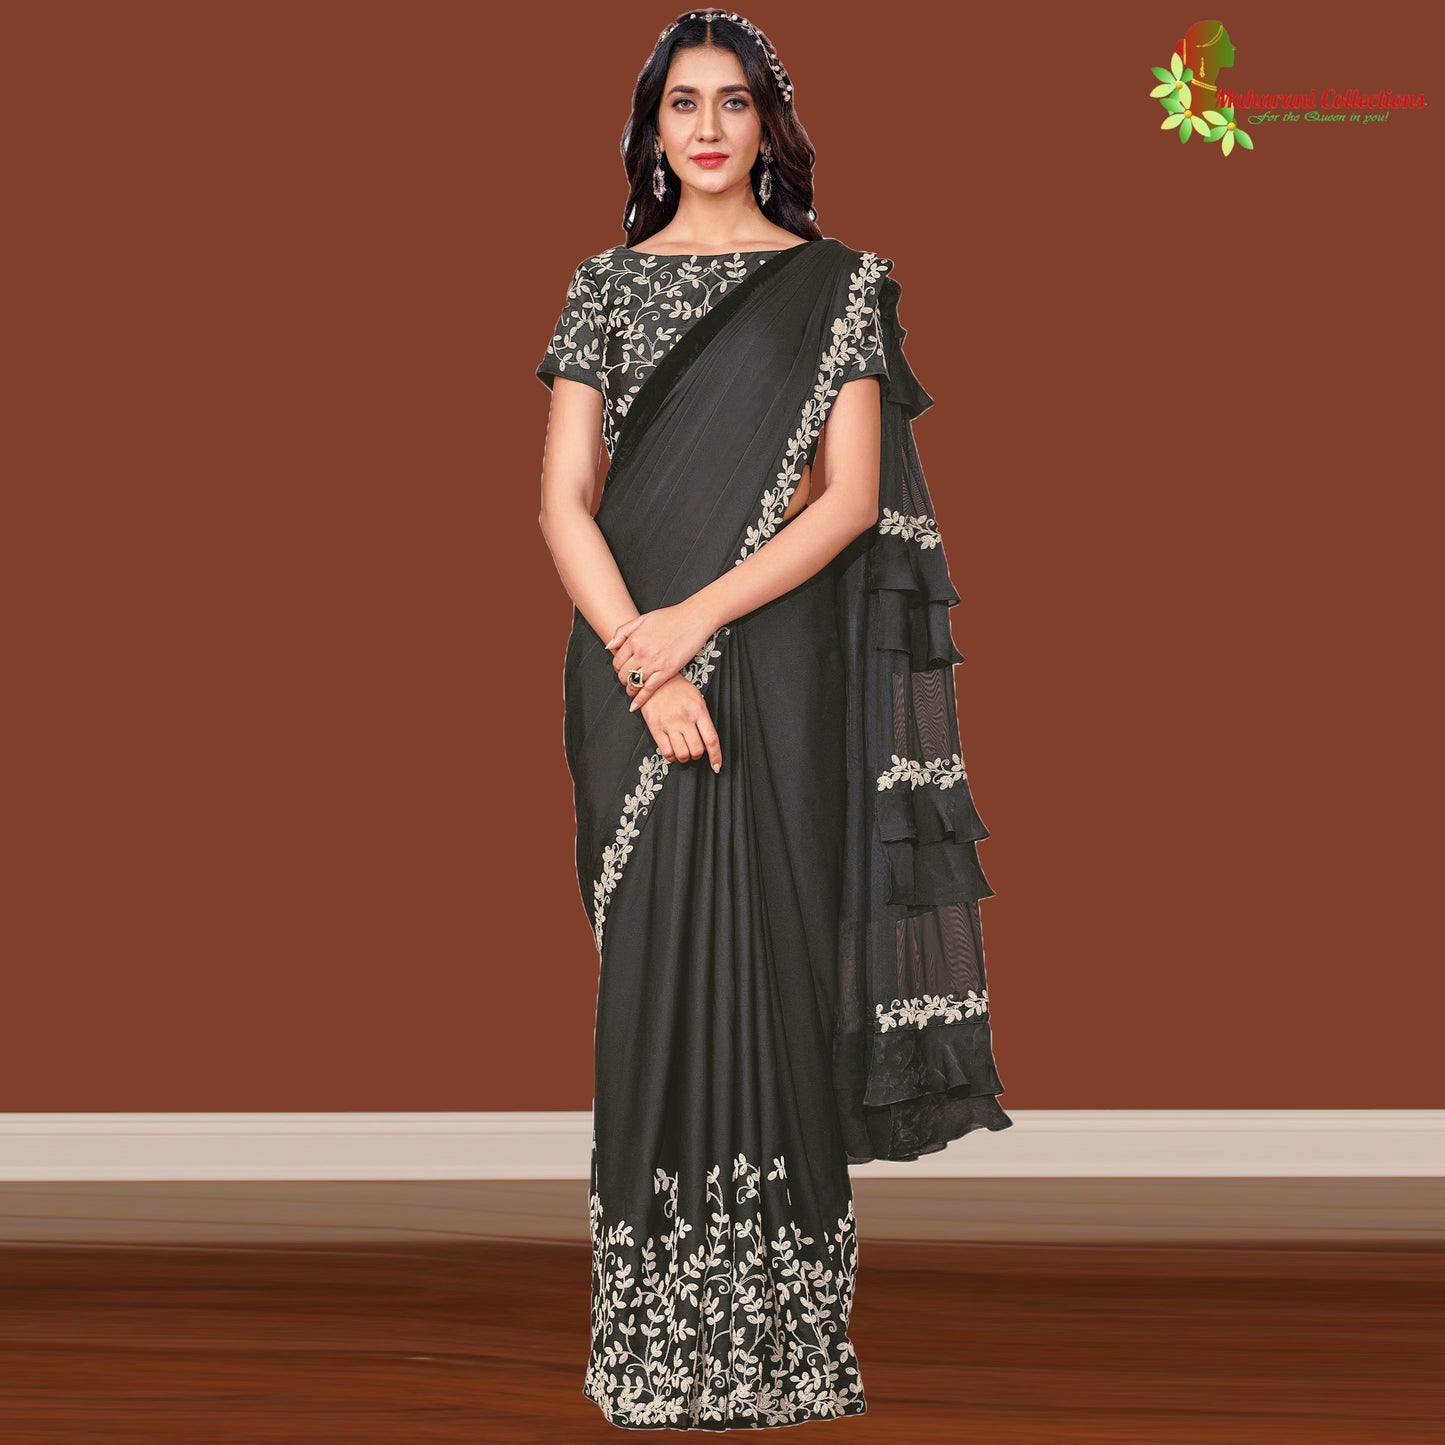 Maharani's Party Wear Stitched Designer Saree - Black (with stitched Blouse & Petticoat)